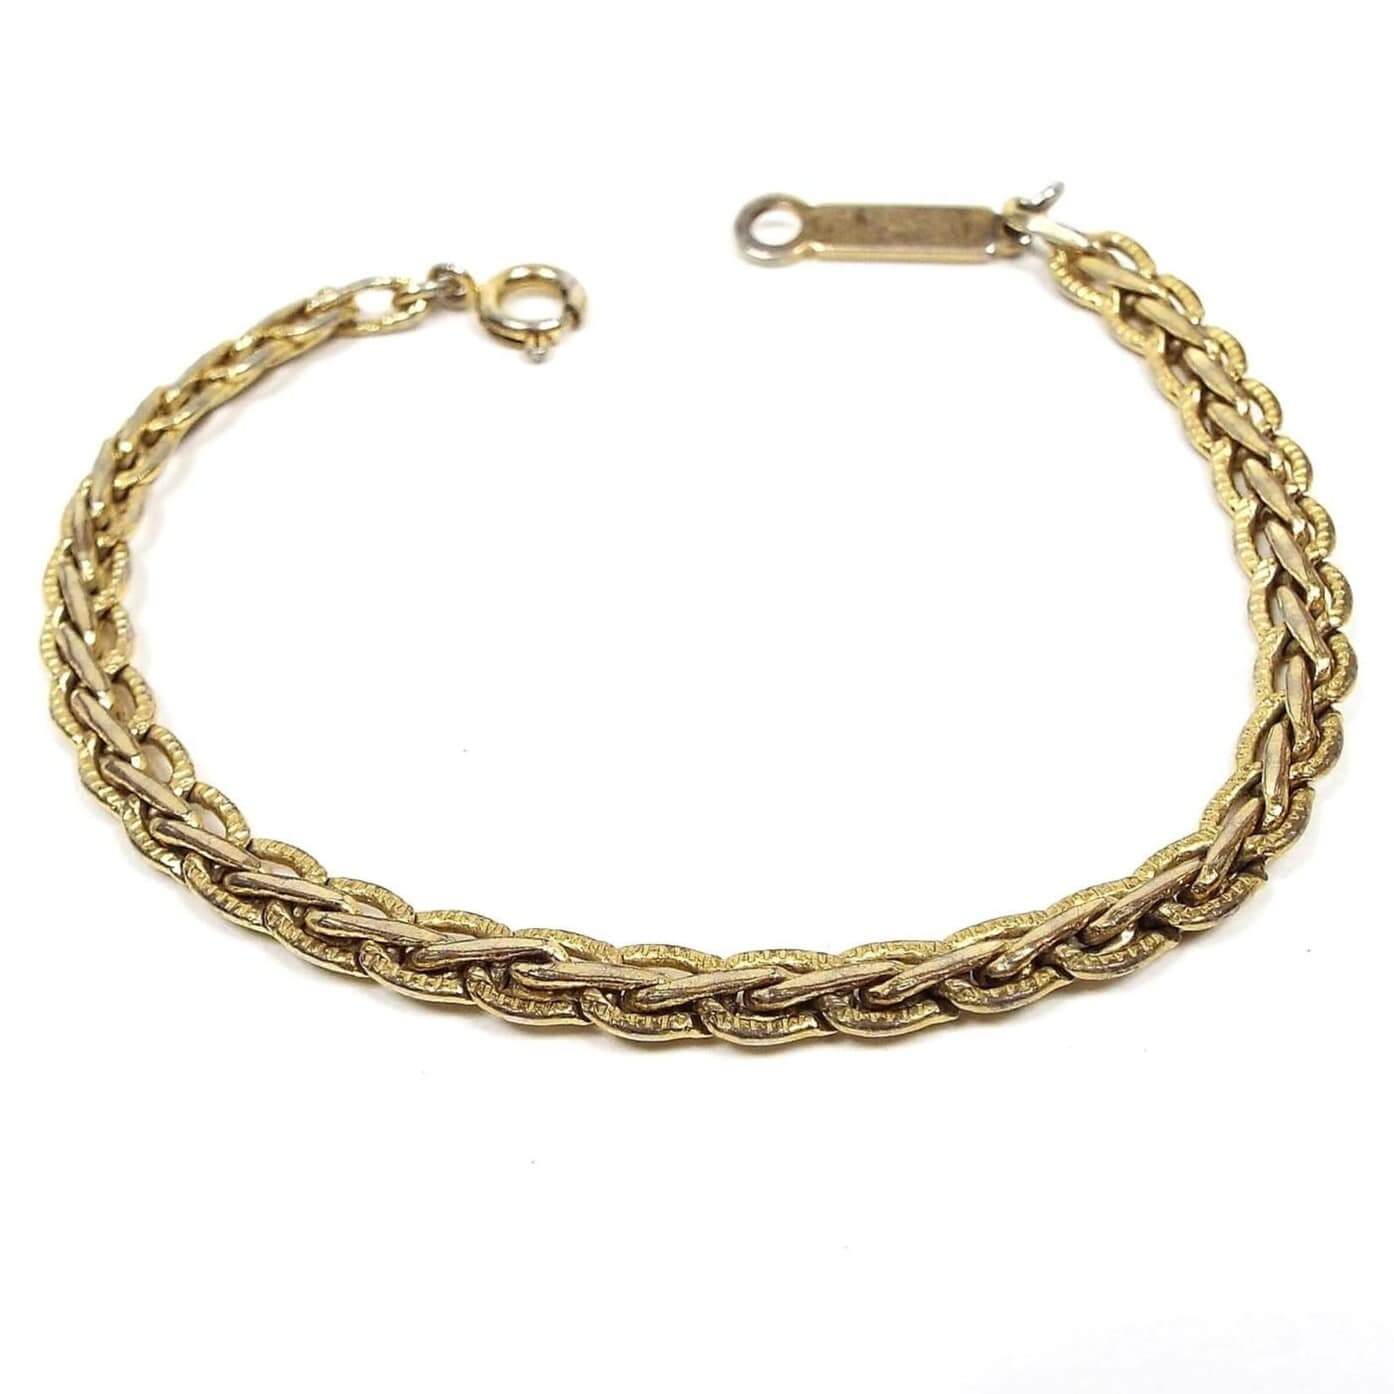 Angled top view of the retro vintage fancy link chain bracelet. It is a slightly darkened gold tone in color. There is a spring ring clasp on one end and a long bar with a loop on the other. The link design is a wheat style braid.